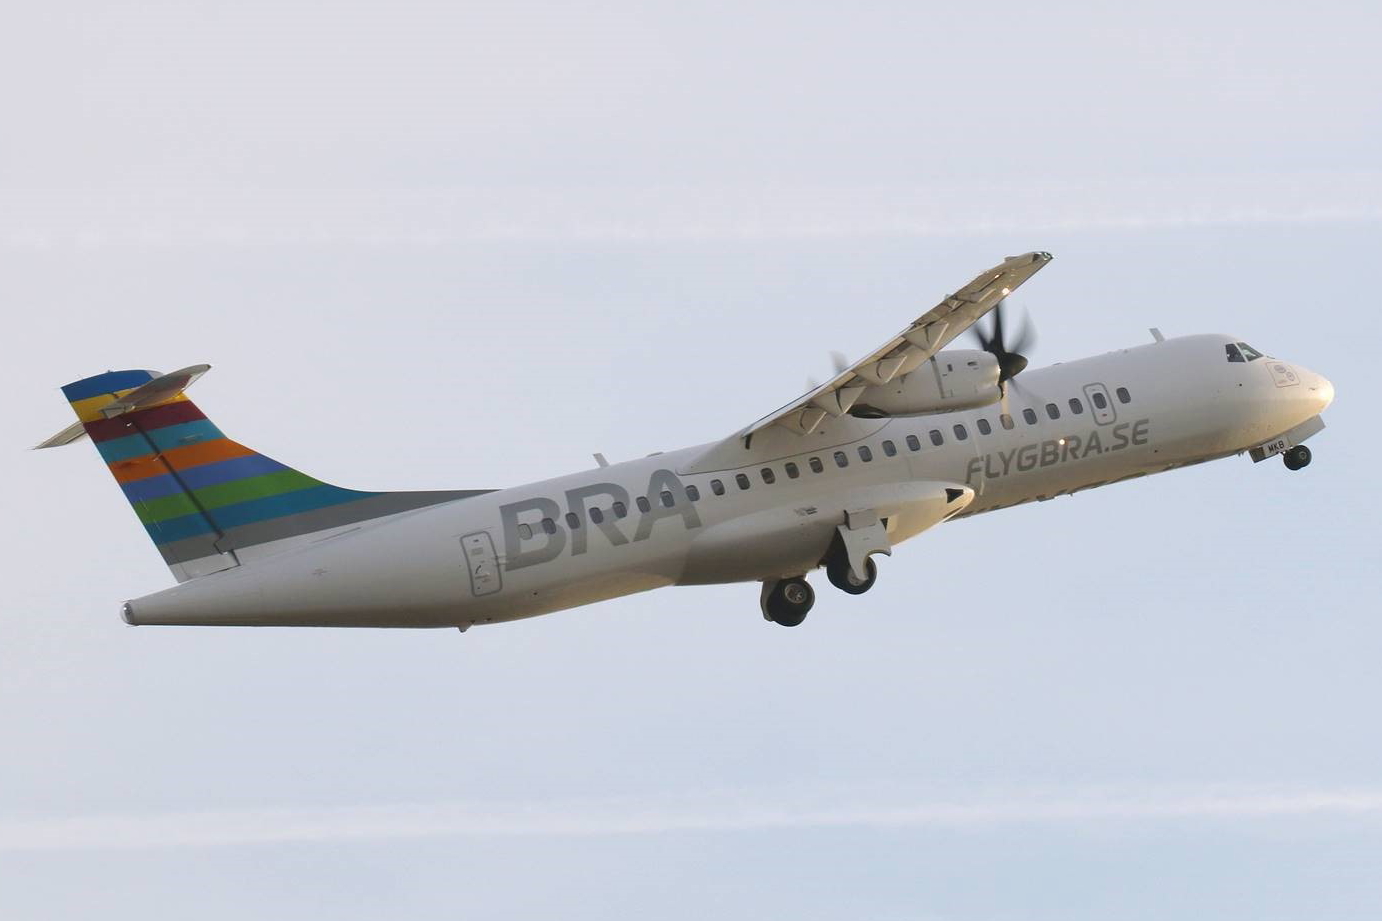 Braathens Regional Airlines (BRA), ATR and Sustainable Aviation Fuel (SAF) producer Neste are working together to accelerate the certification of ATR aircraft flying with 100% Neste MY Sustainable Aviation Fuel. Click to enlarge.